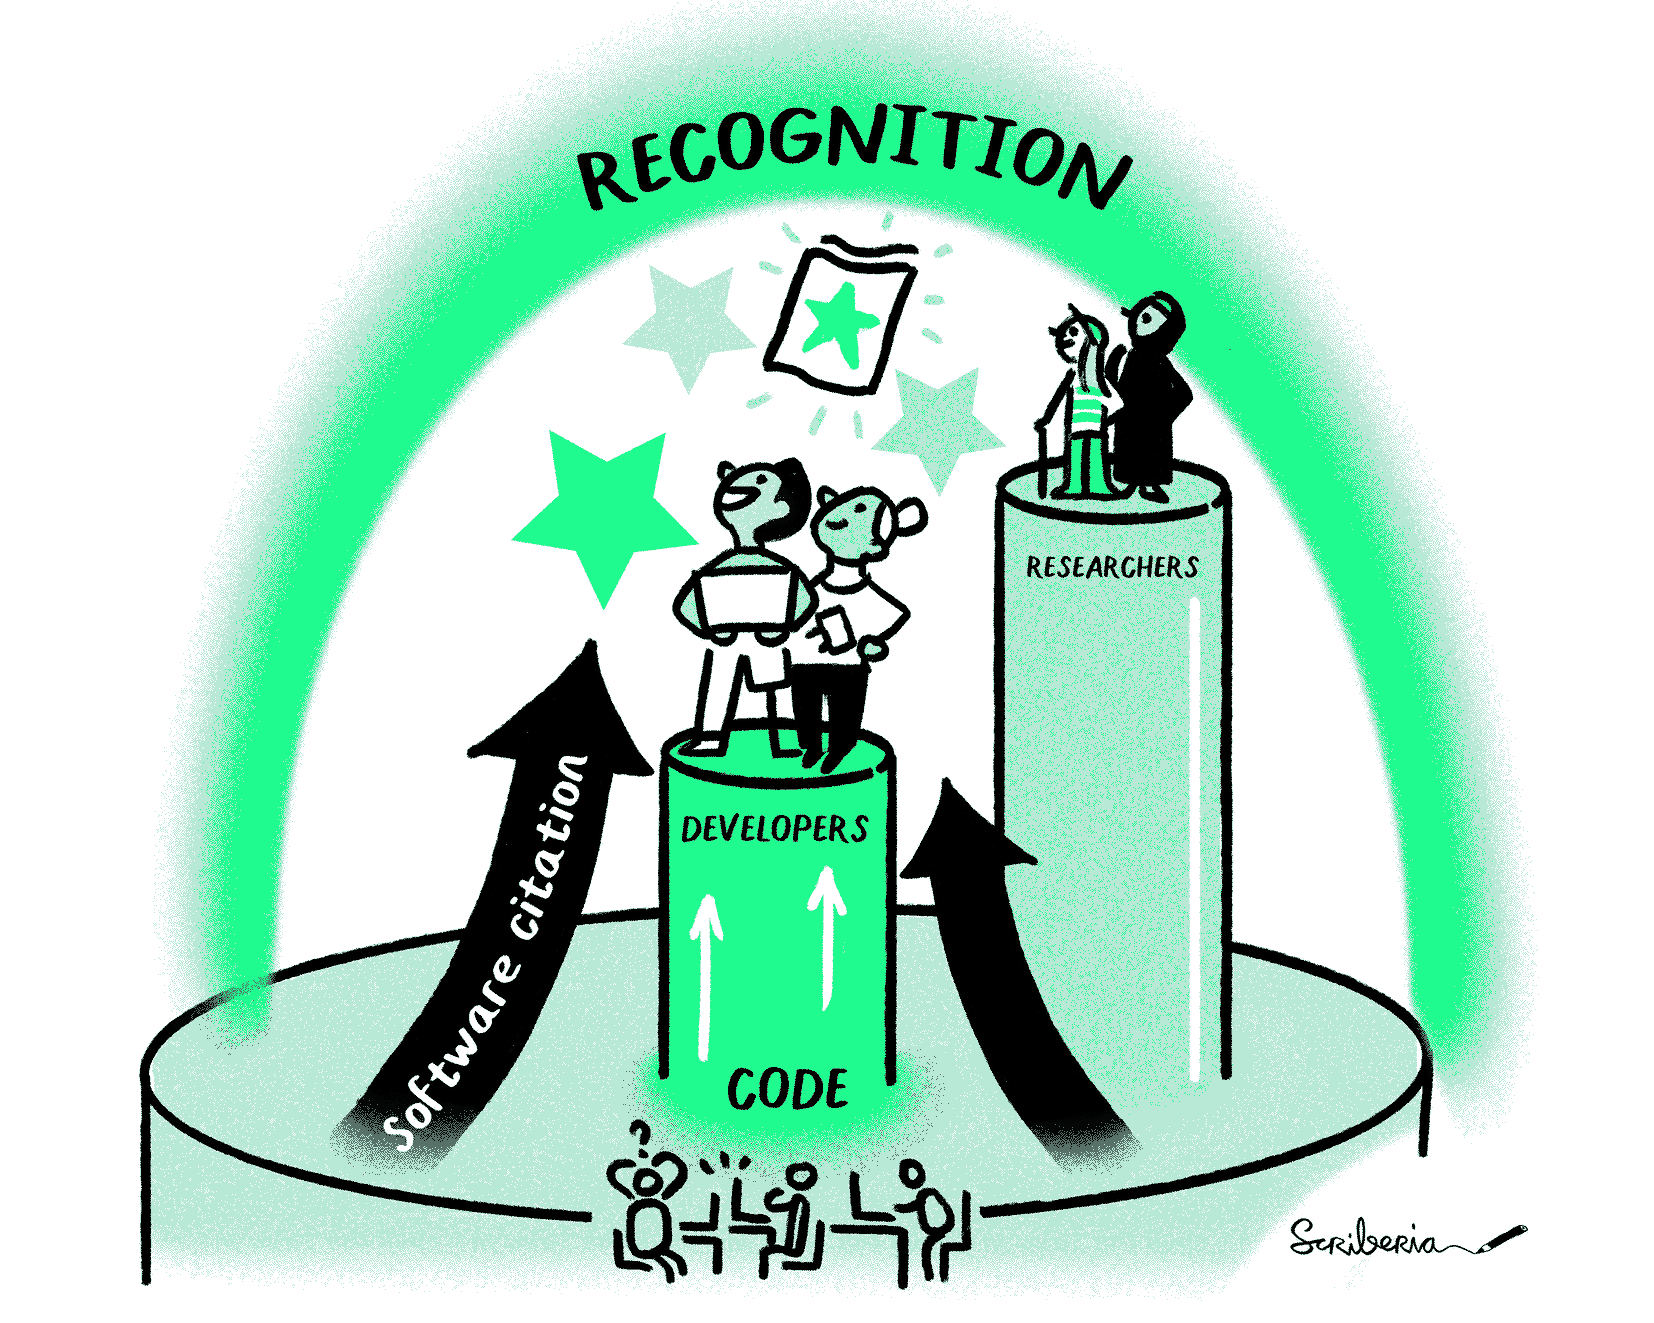 Research software developers get recognition by making software citable.